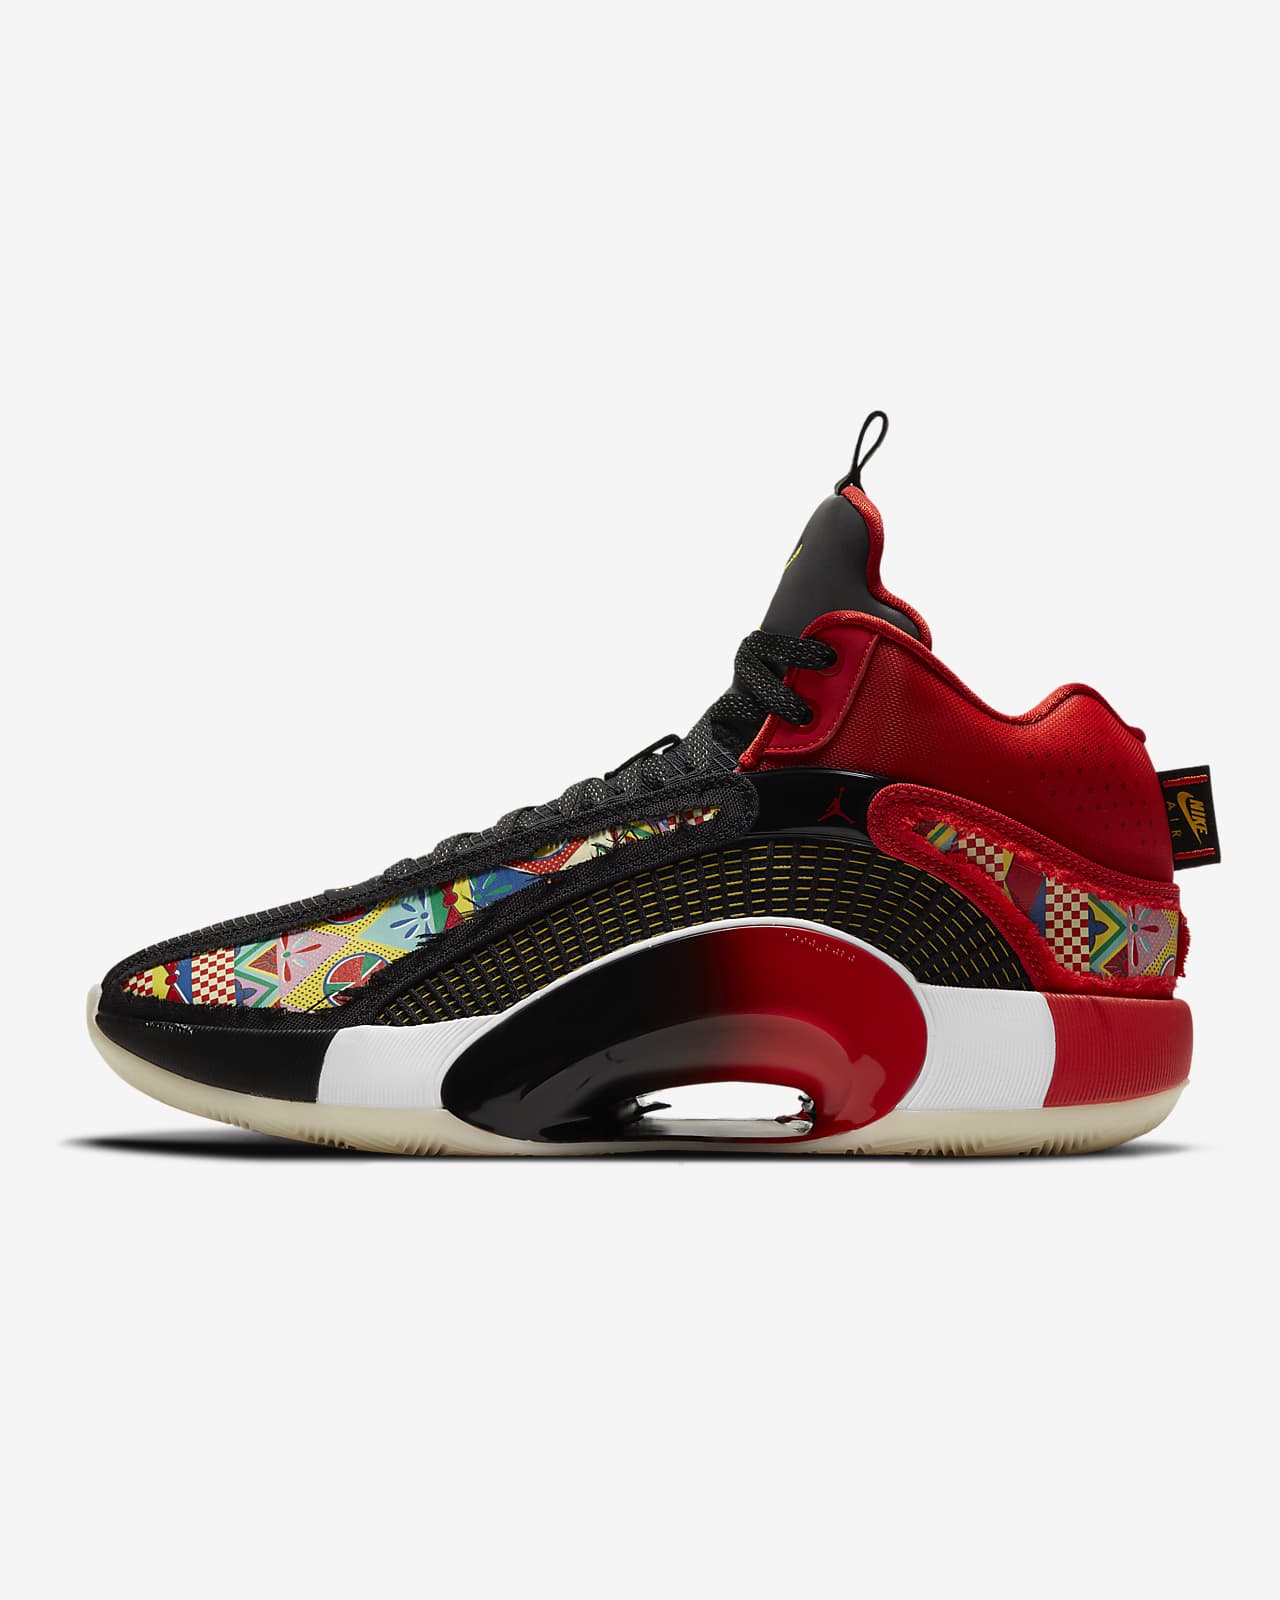 chinese new year basketball shoes